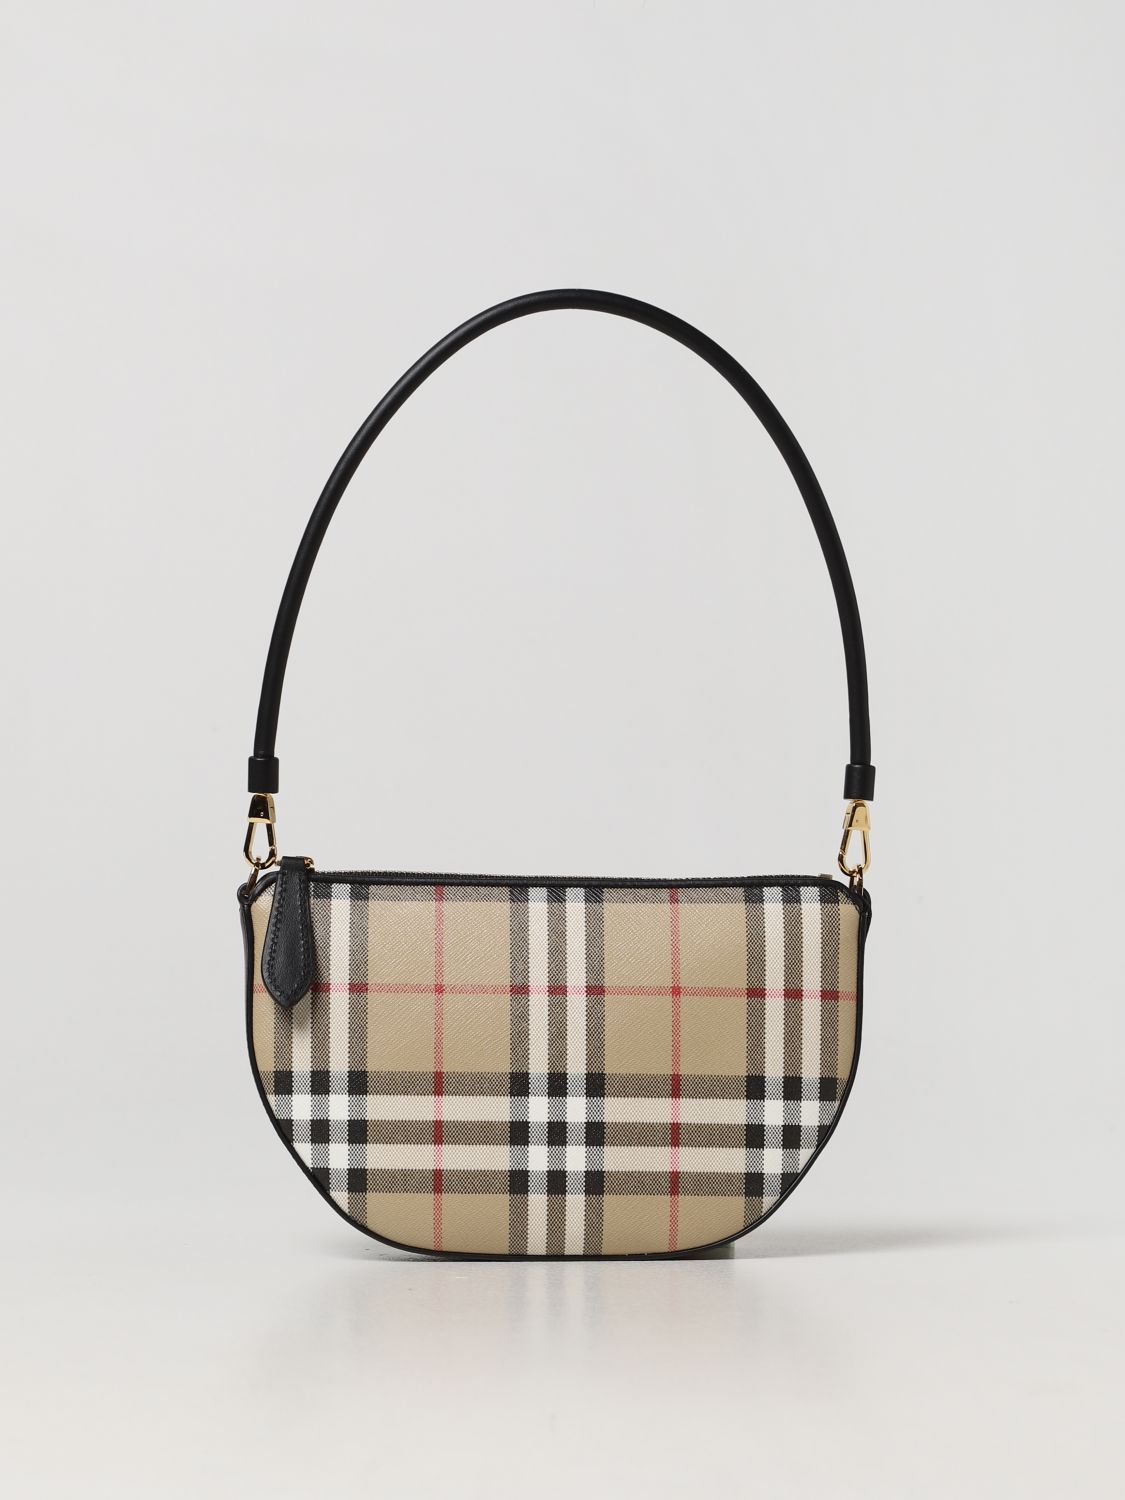 Burberry's New Baby Is a Bag